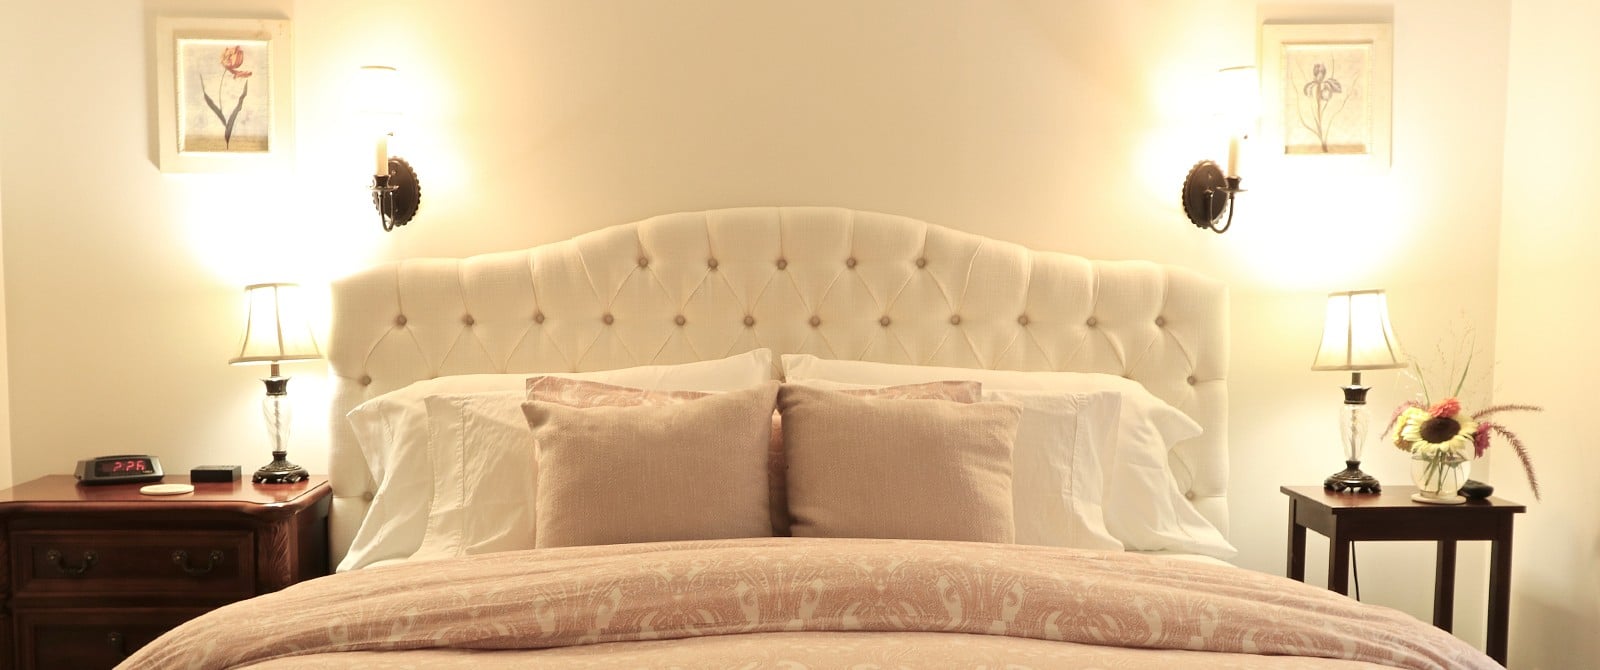 King bed with white upholstered headboard, pink and white bedding and soft light lamps